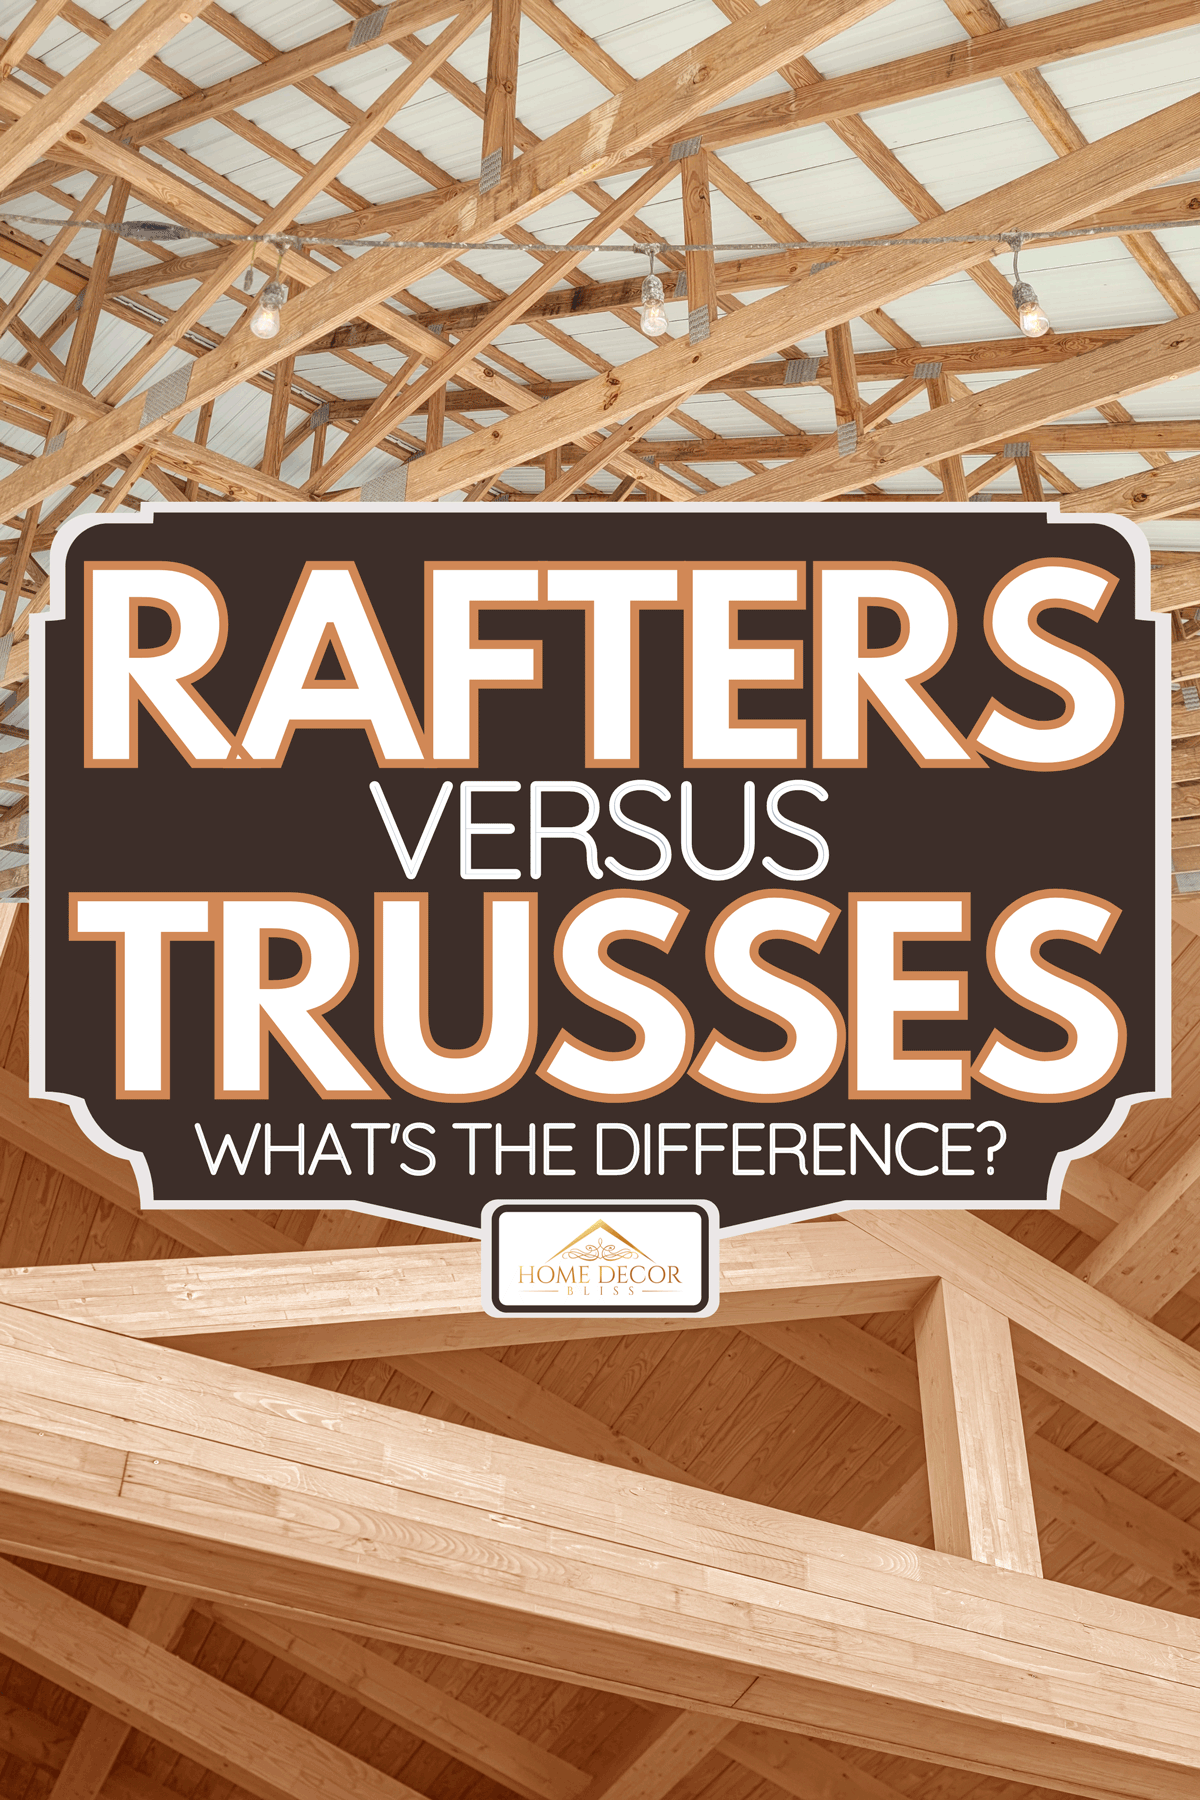 Rafters and trusses comparison, Rafters Vs. Trusses: What's The Difference?